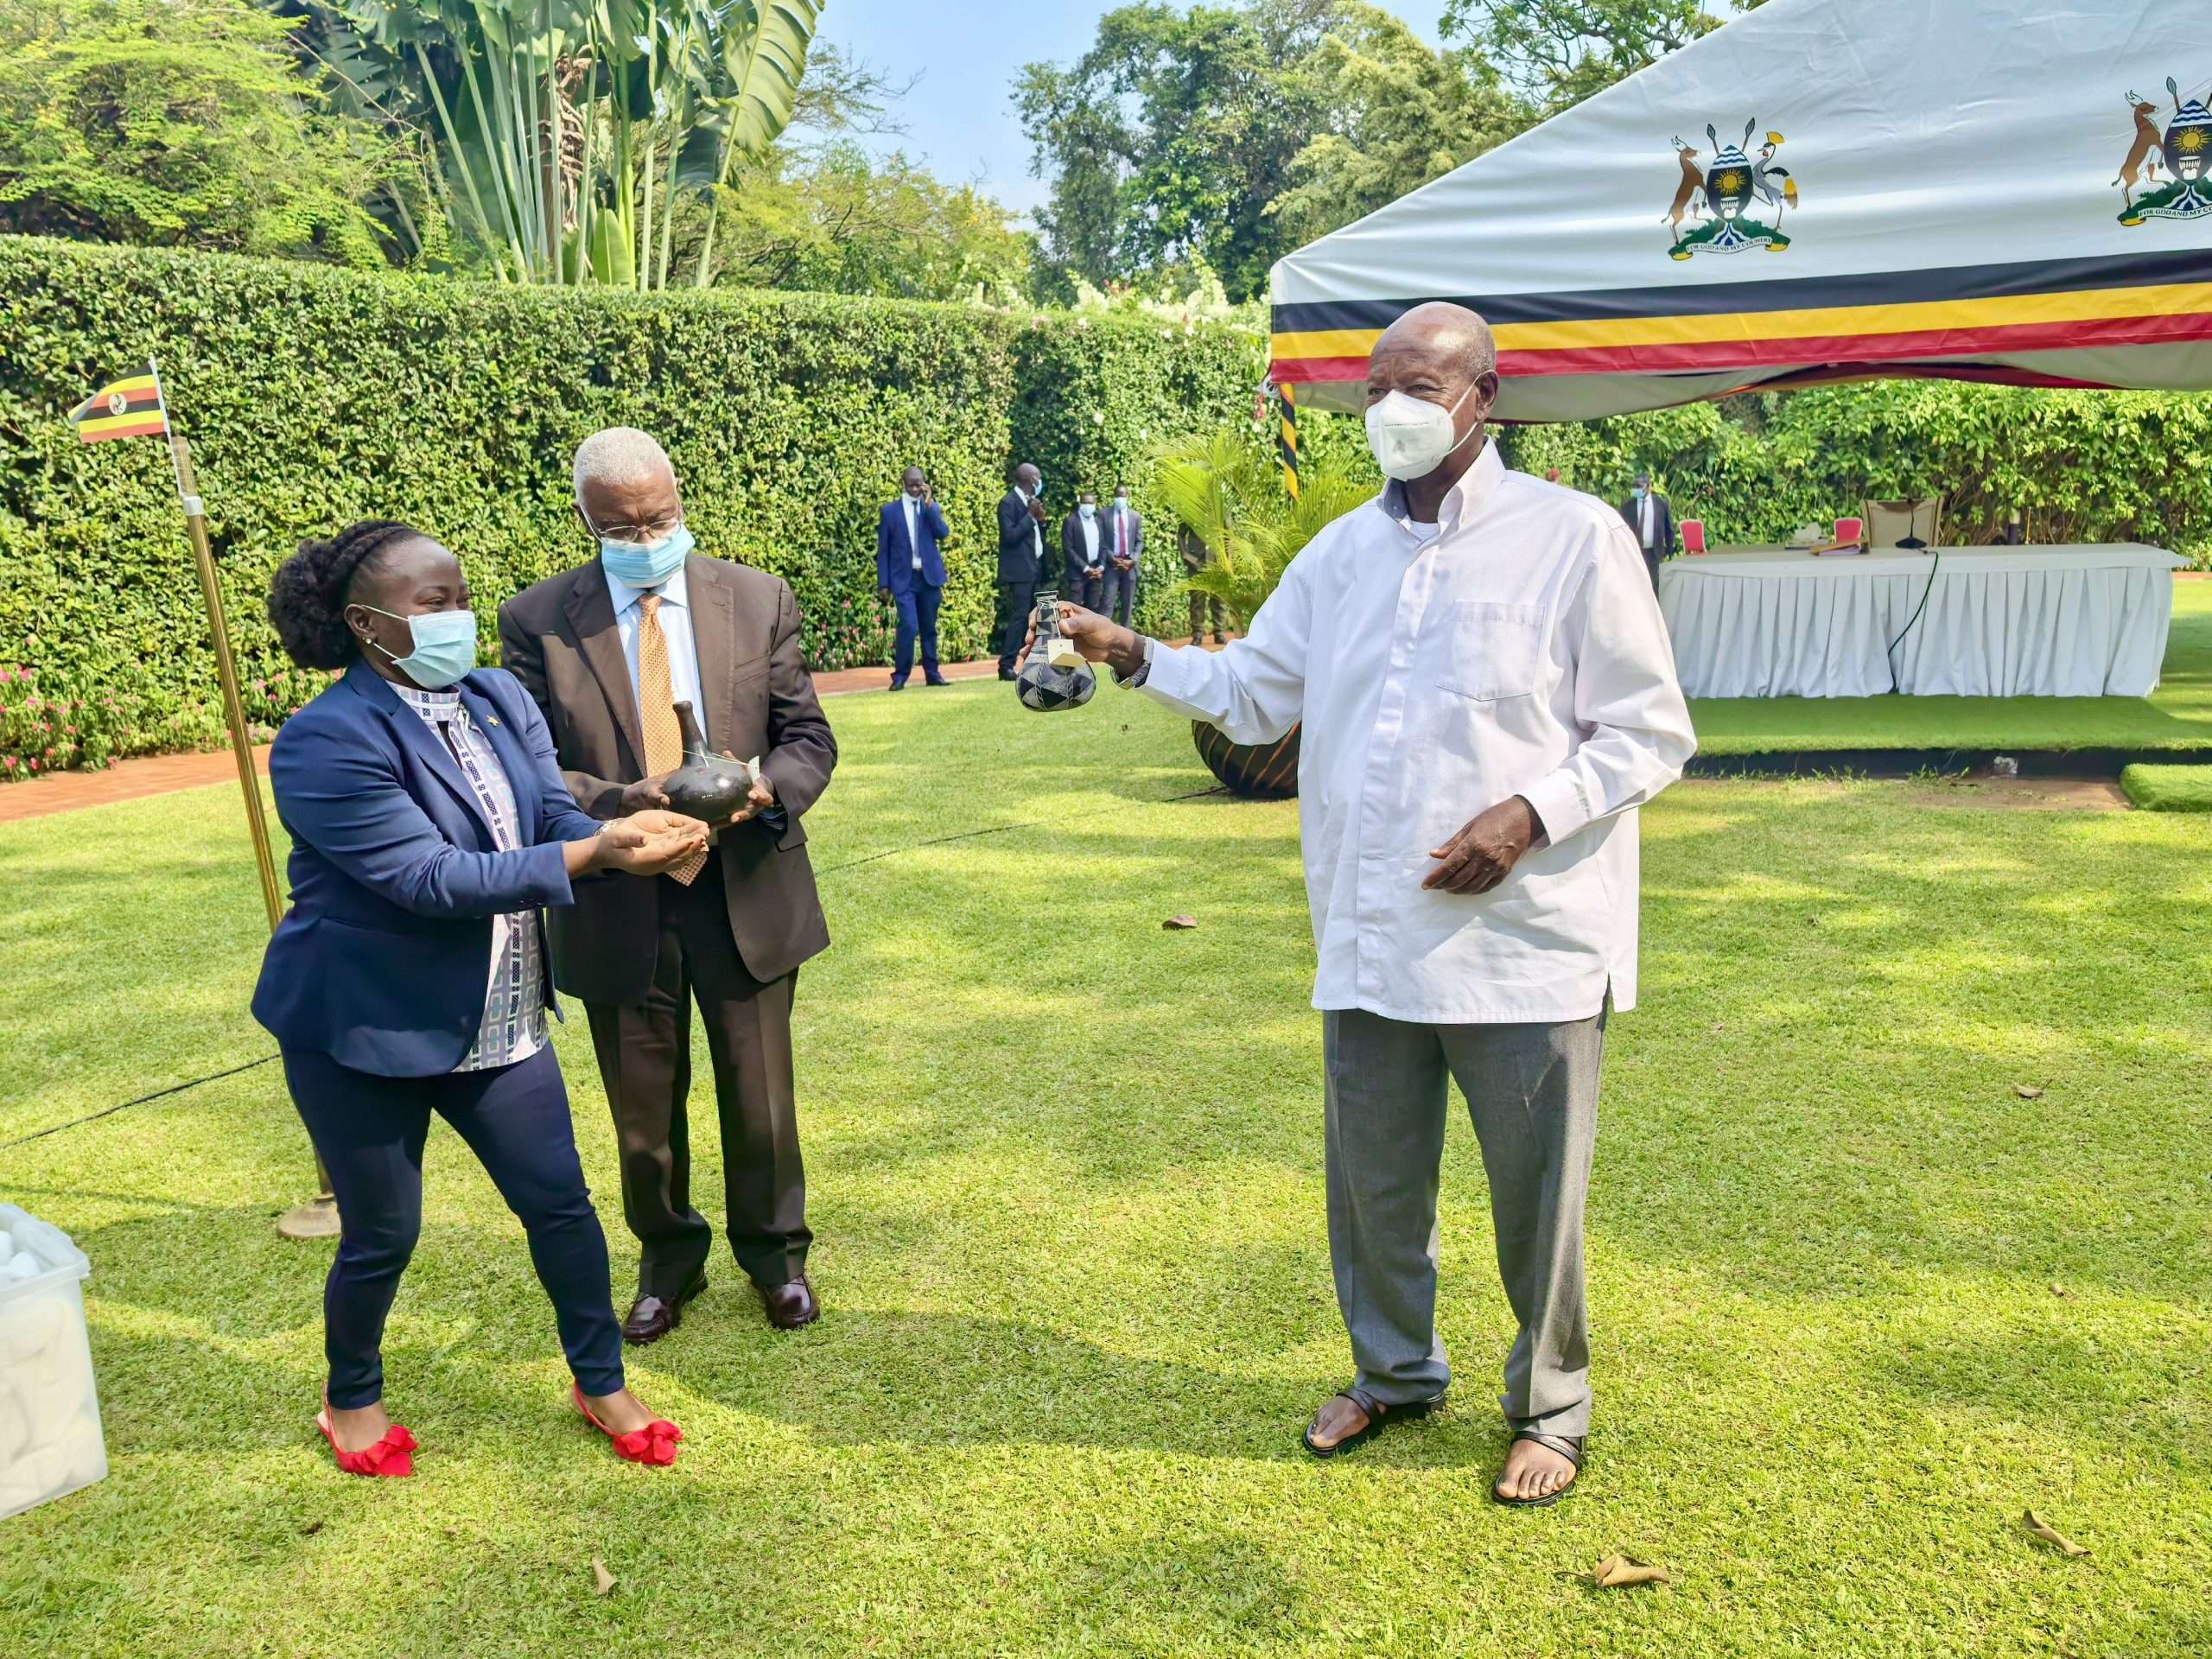 President Museveni Welcomes Return of Cultural Heritage Artifacts to Uganda